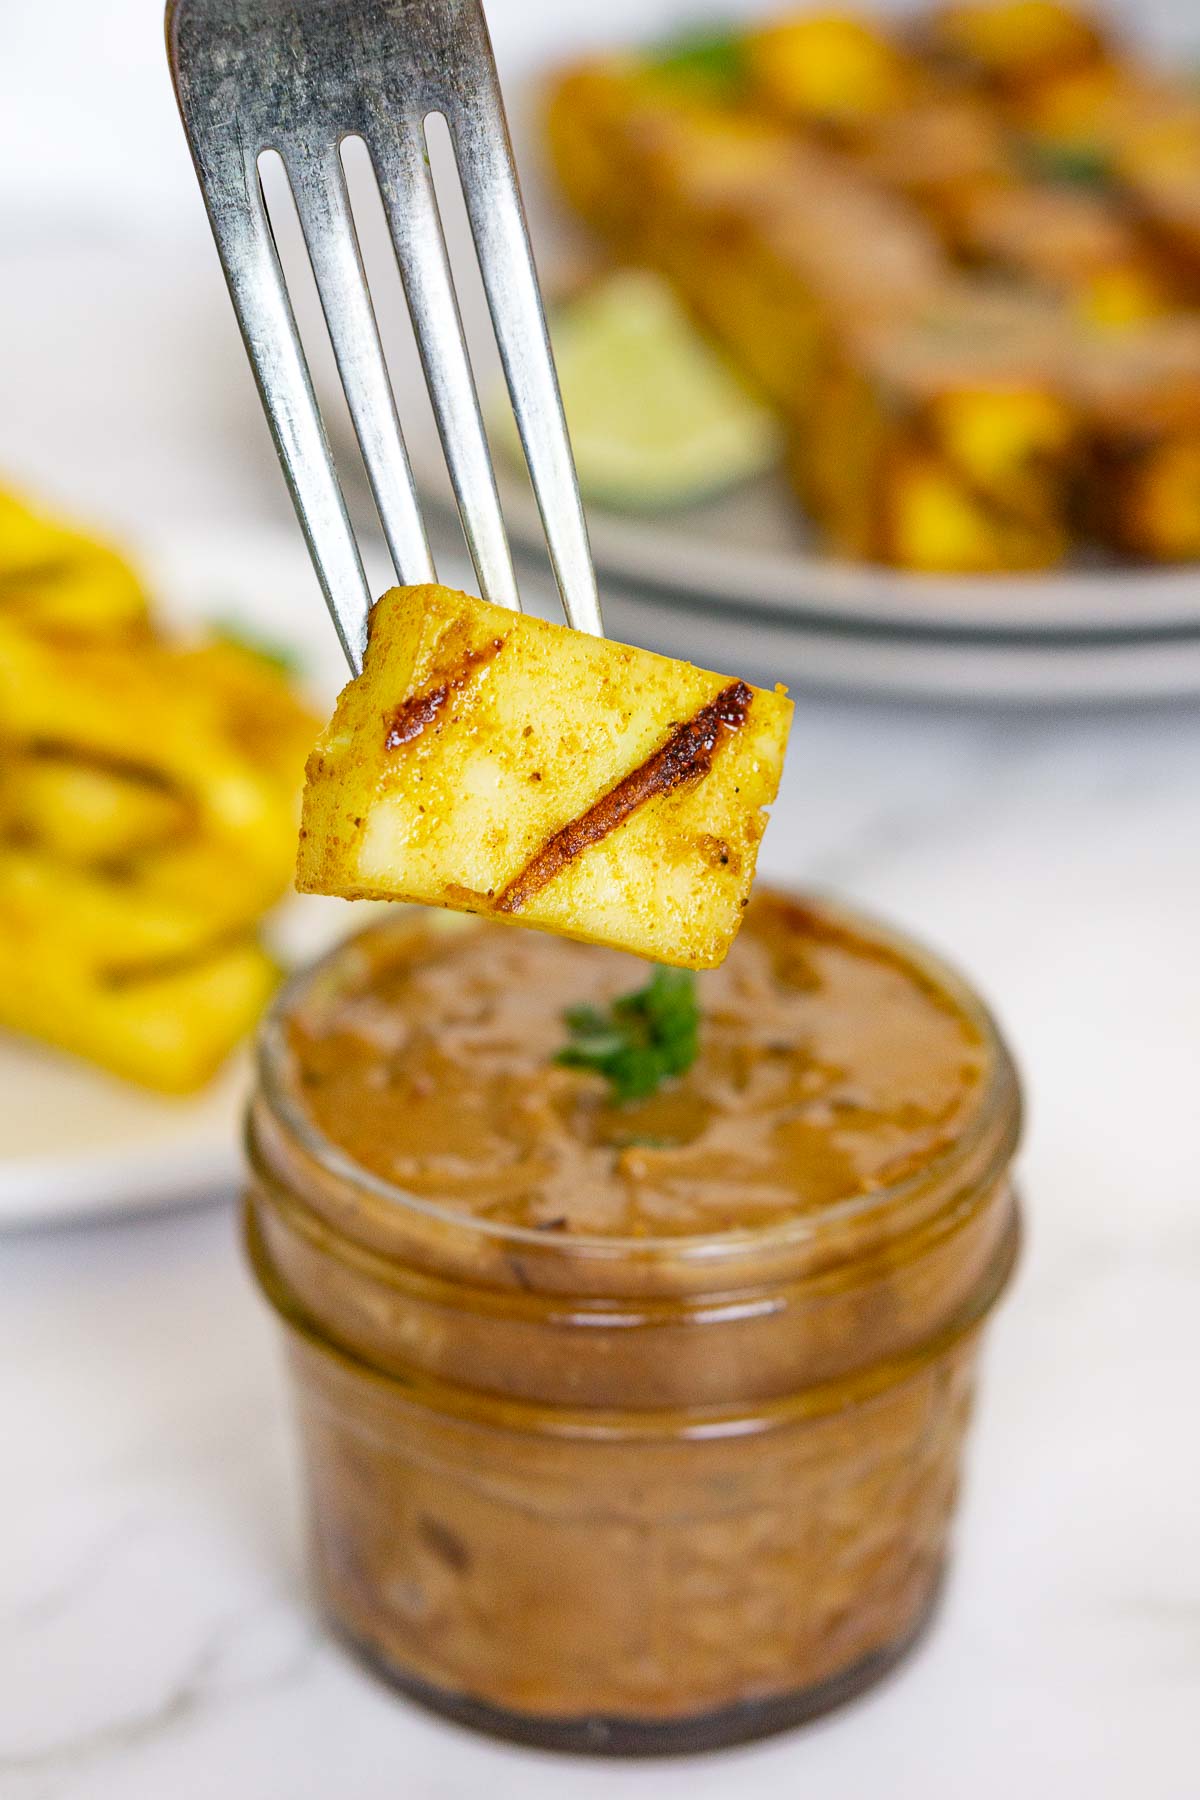 Dipping piece of grilled paneer into peanut sauce